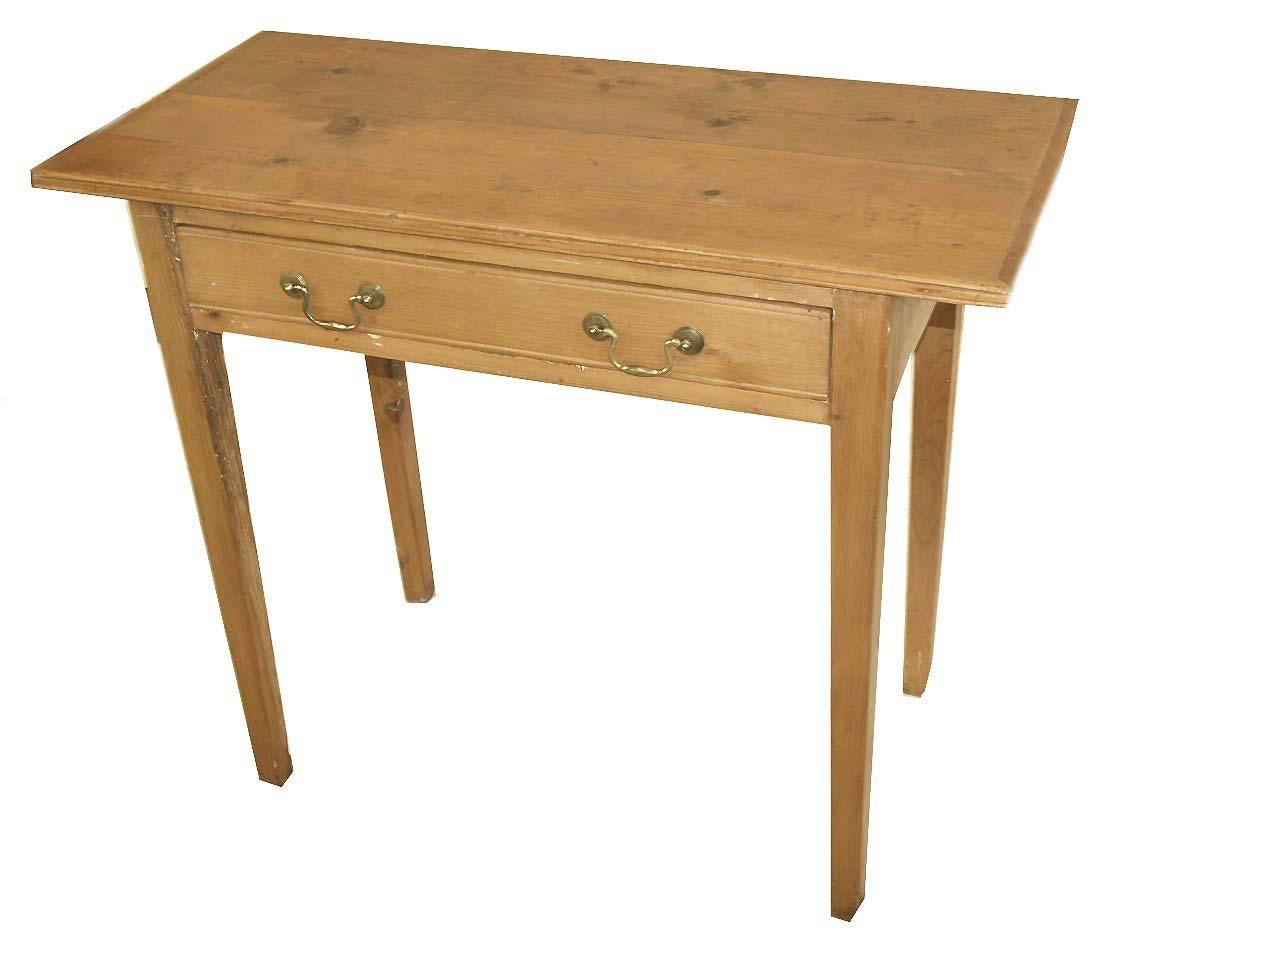 Mid-19th Century English Pine One Drawer Table